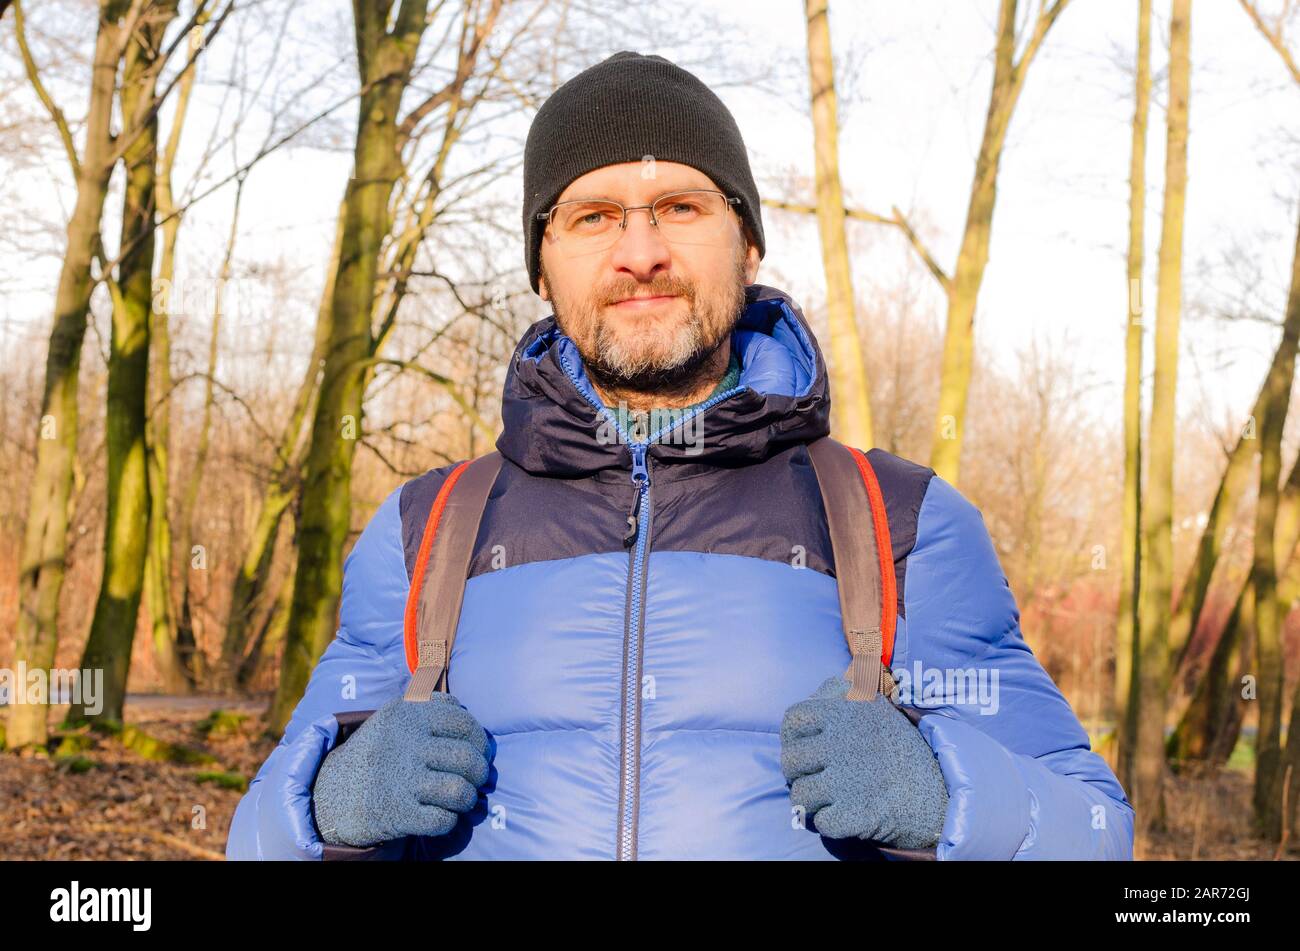 A portrait of a middle-aged man in blue down jacket and a backpack in the barren forest on a sunny day Stock Photo